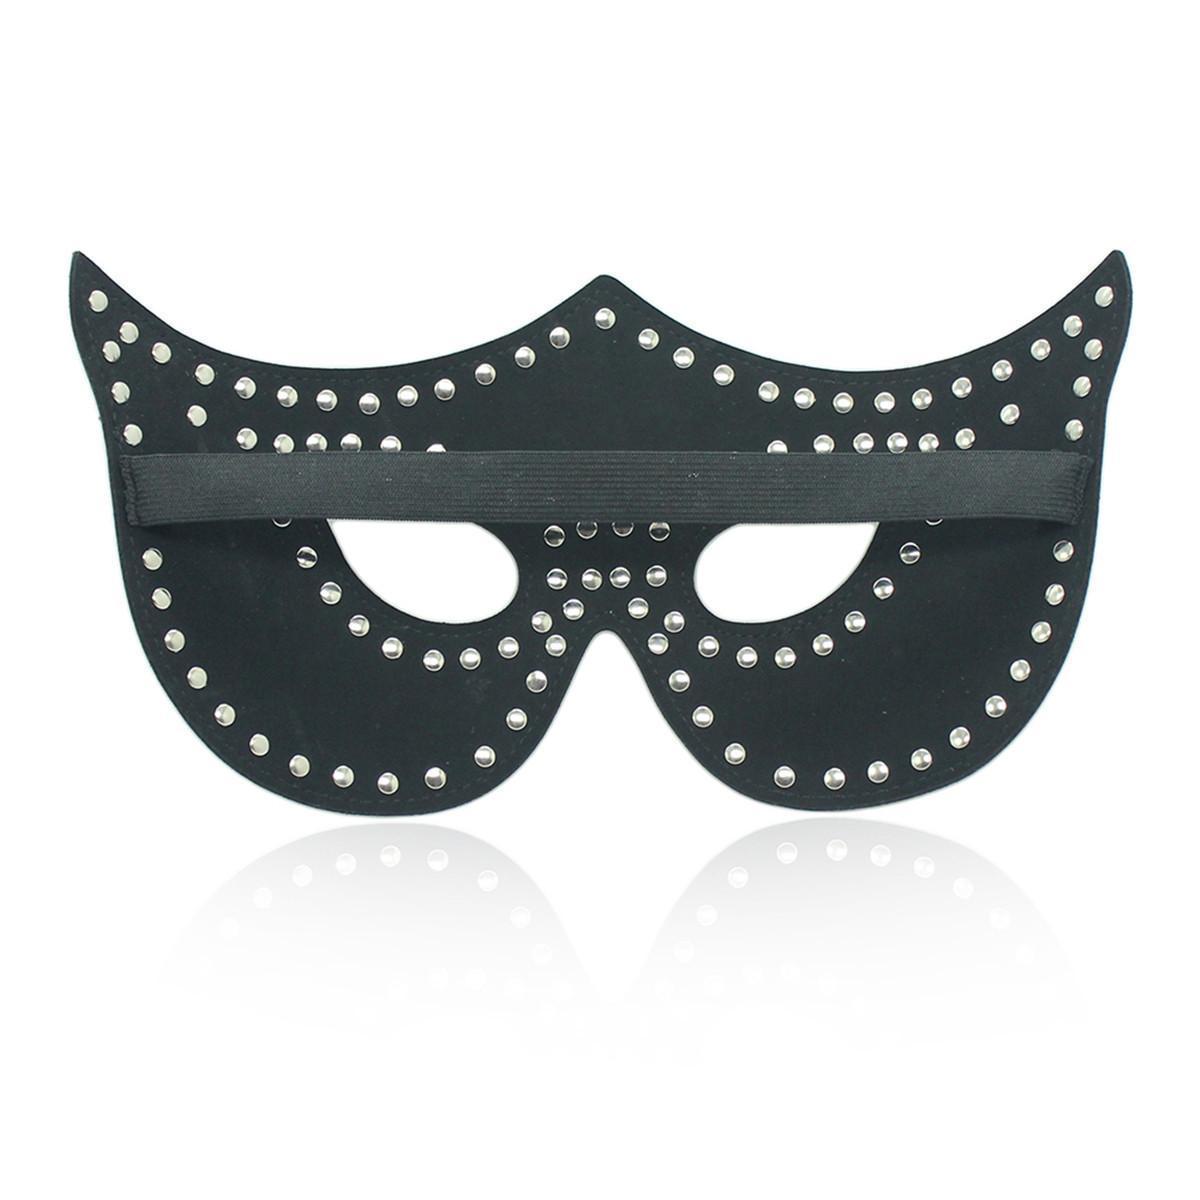 Fun eye mask, Pu witch mask, COSPLAY Ghost Festival mask props